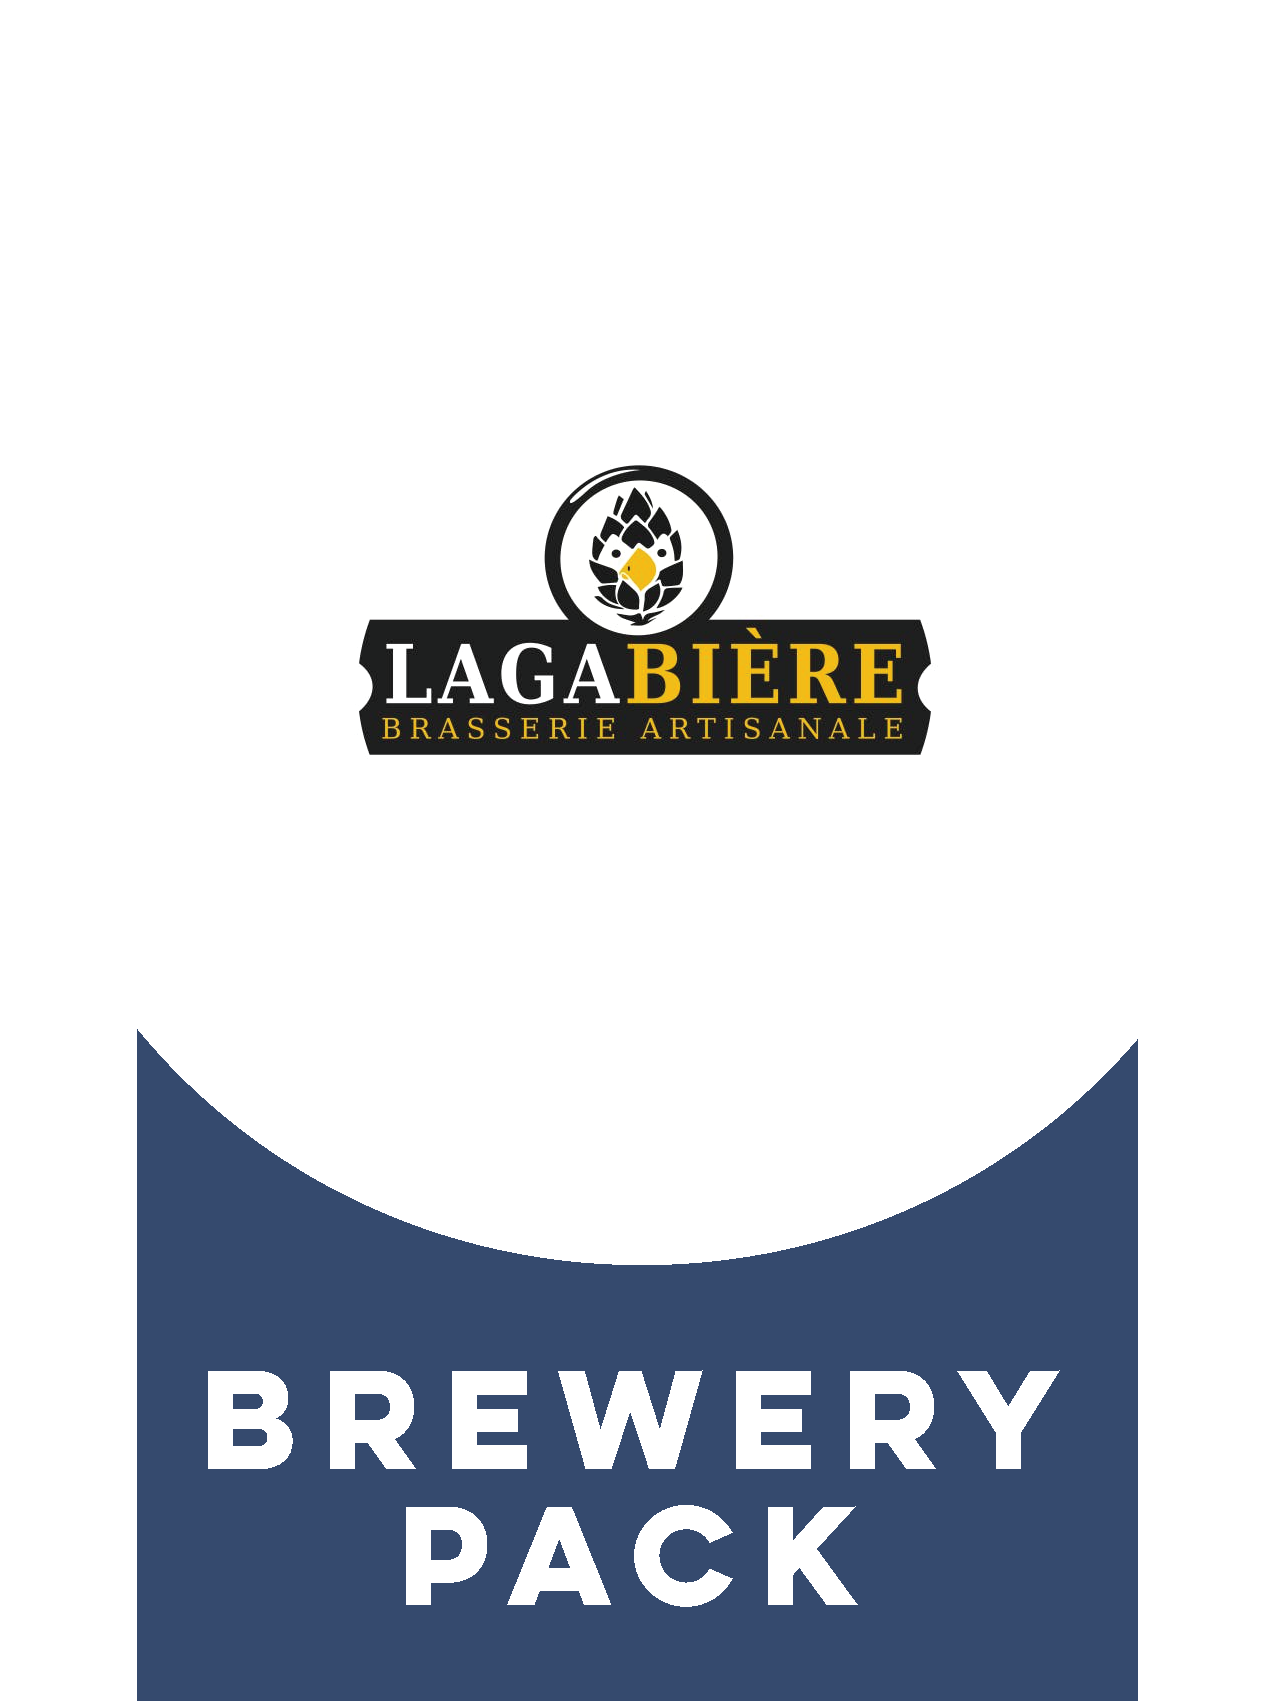 -Lagabière- Lagabière Brewery Pack-Packs & Cases- Only @ Beer Republic - The best online beer store for American & Canadian craft beer - Buy beer online from the USA and Canada - Bier online kopen - Amerikaans bier kopen - Craft beer store - Craft beer kopen - Amerikanisch bier kaufen - Bier online kaufen - Acheter biere online - IPA - Stout - Porter - New England IPA - Hazy IPA - Imperial Stout - Barrel Aged - Barrel Aged Imperial Stout - Brown - Dark beer - Blond - Blonde - Pilsner - Lager - Wheat - Weize